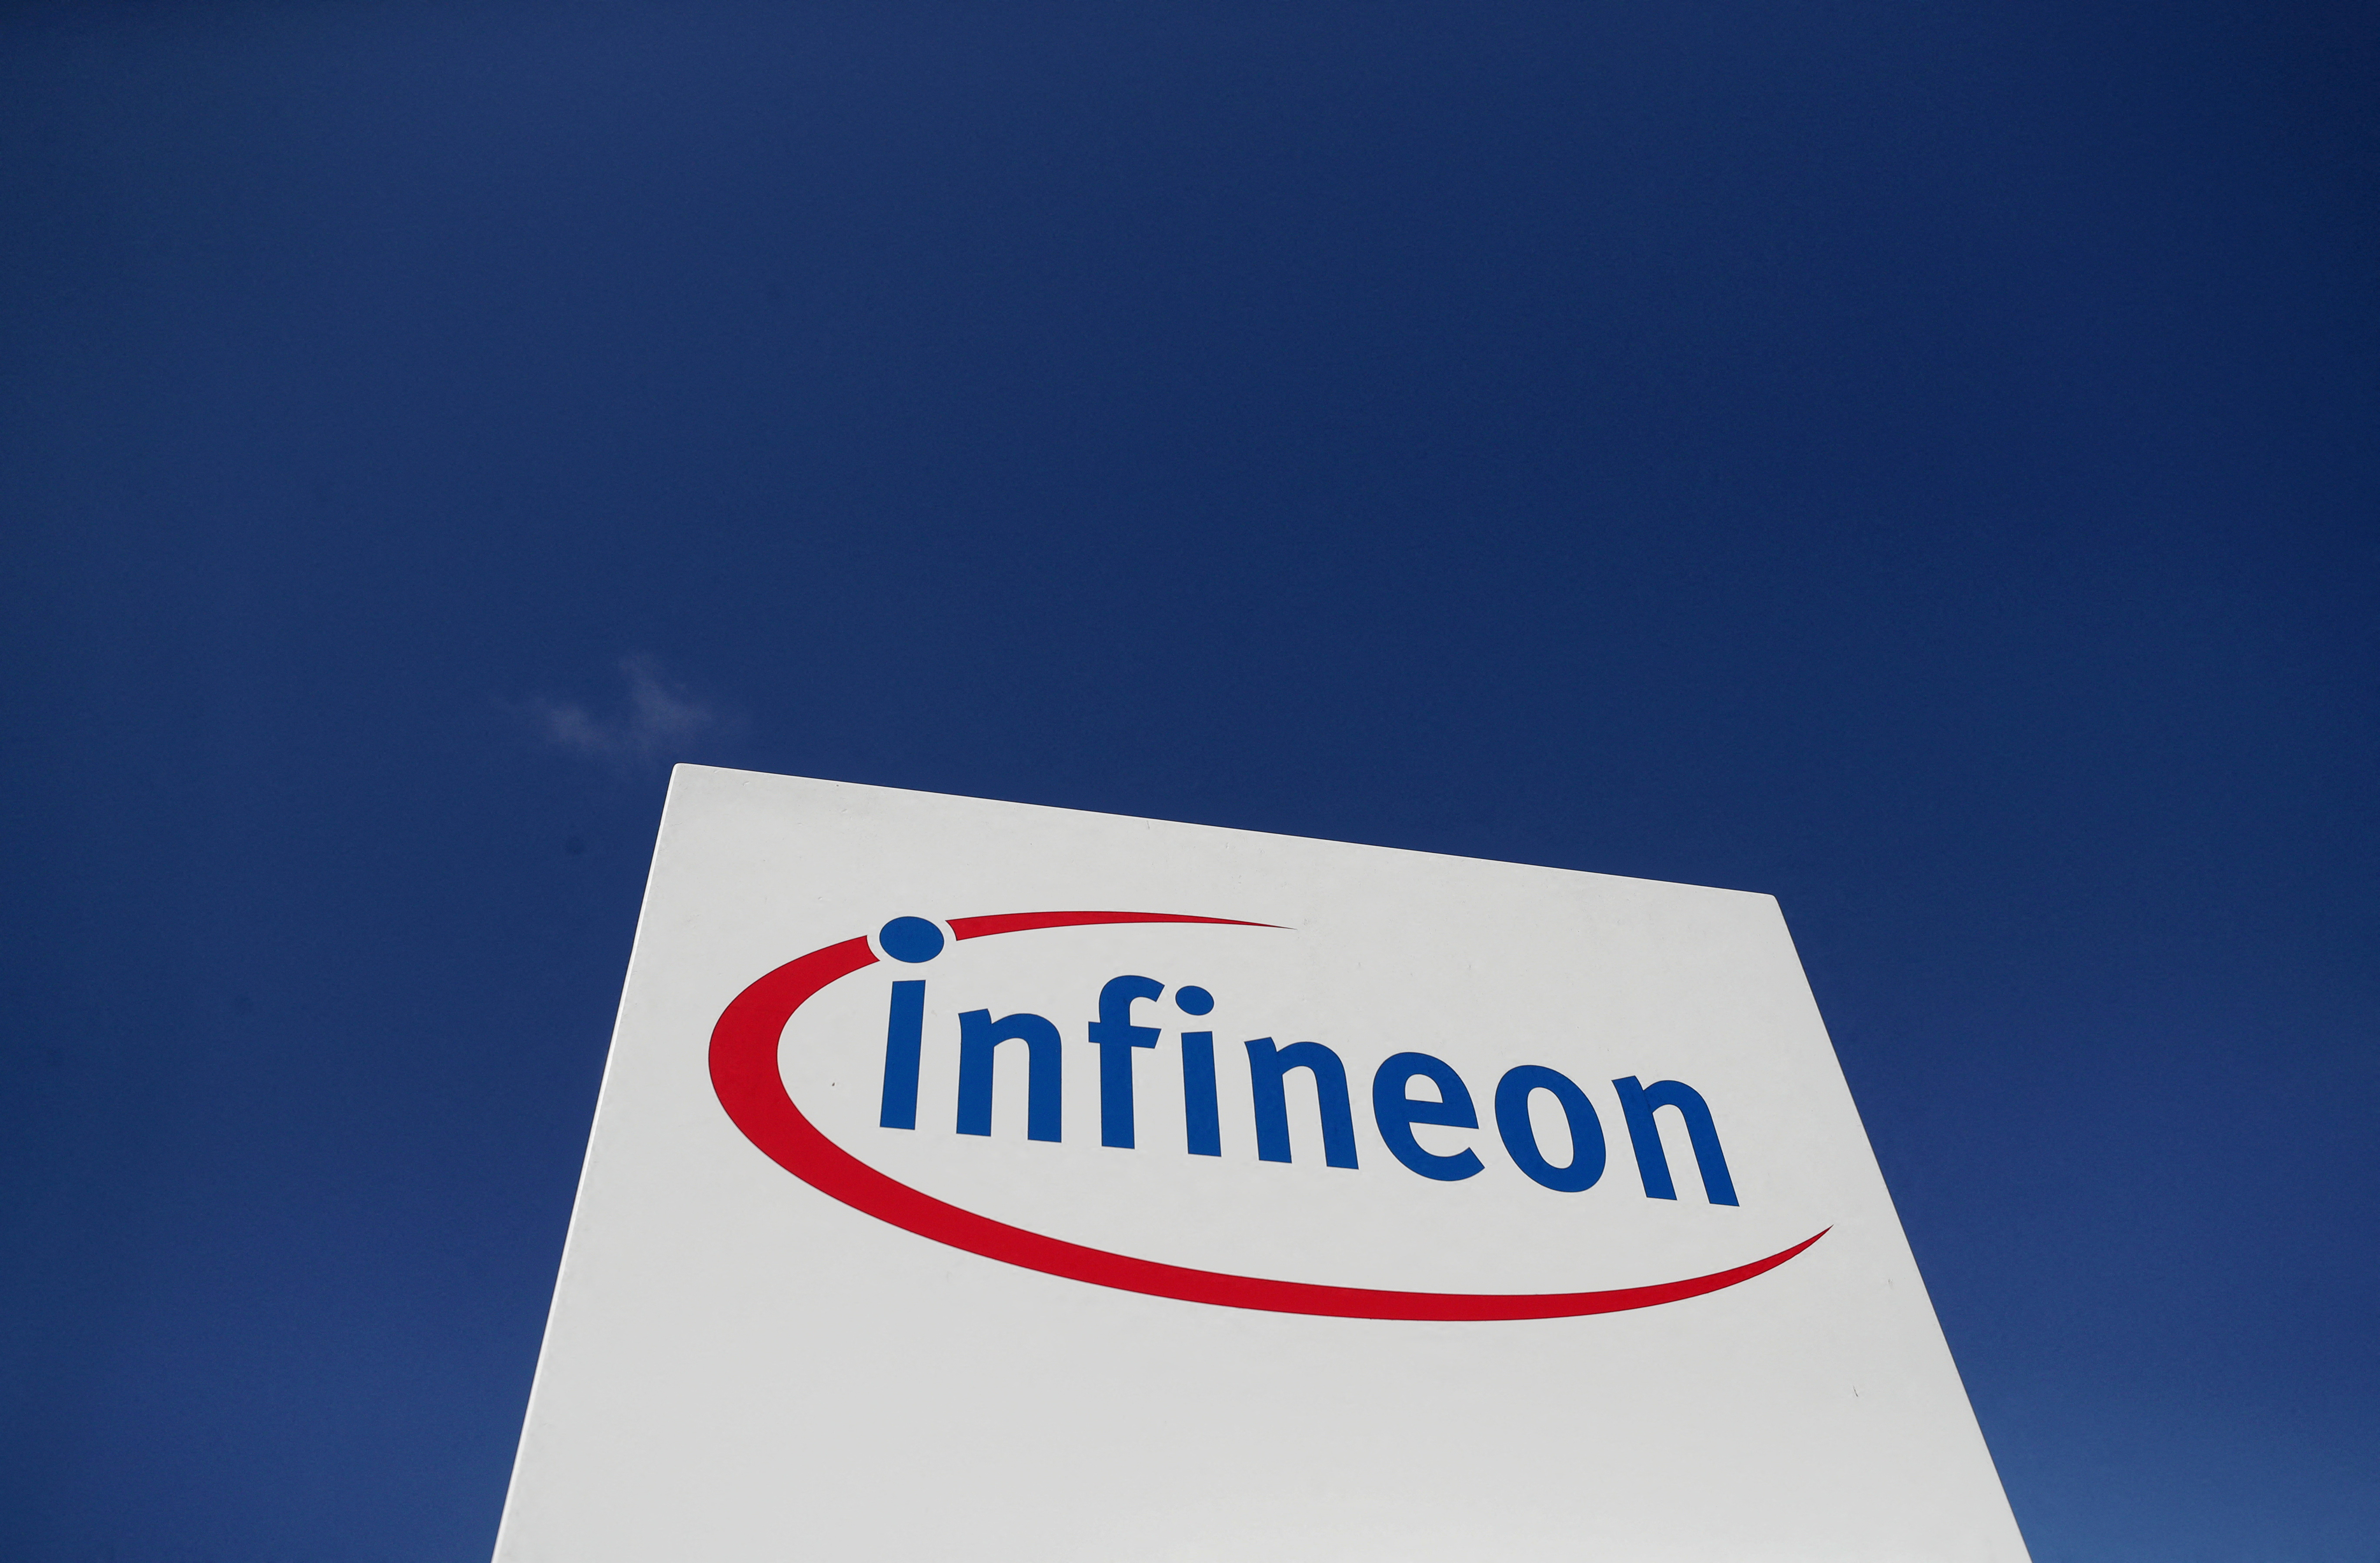 The logo of semiconductor manufacturer Infineon is seen at its Austrian headquarters in Villach